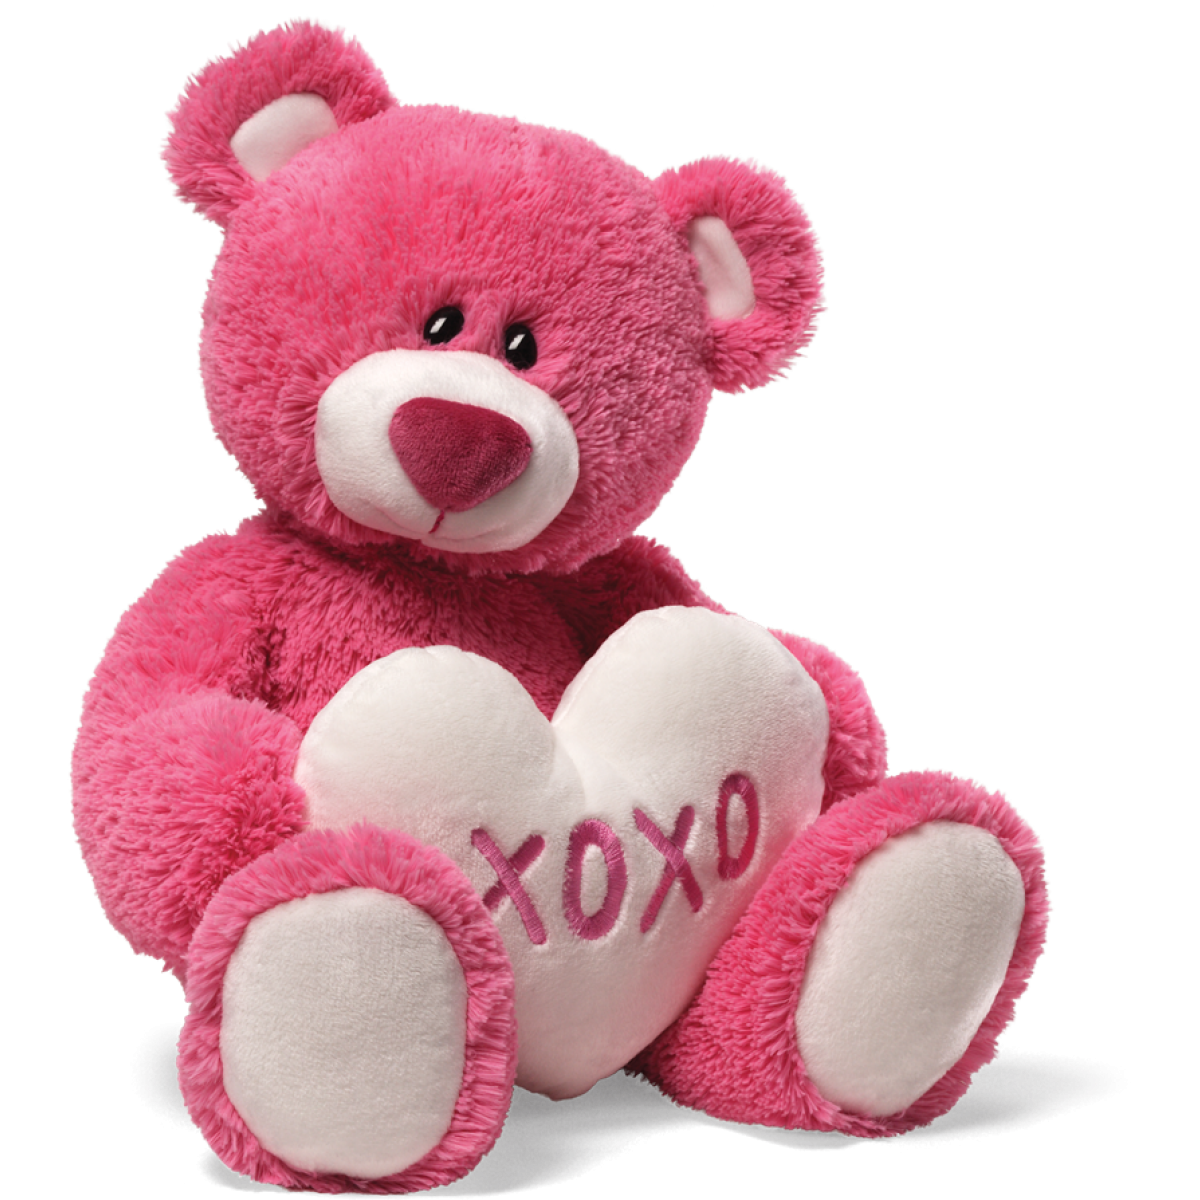 Download PNG image - Teddy Bear PNG Picture 